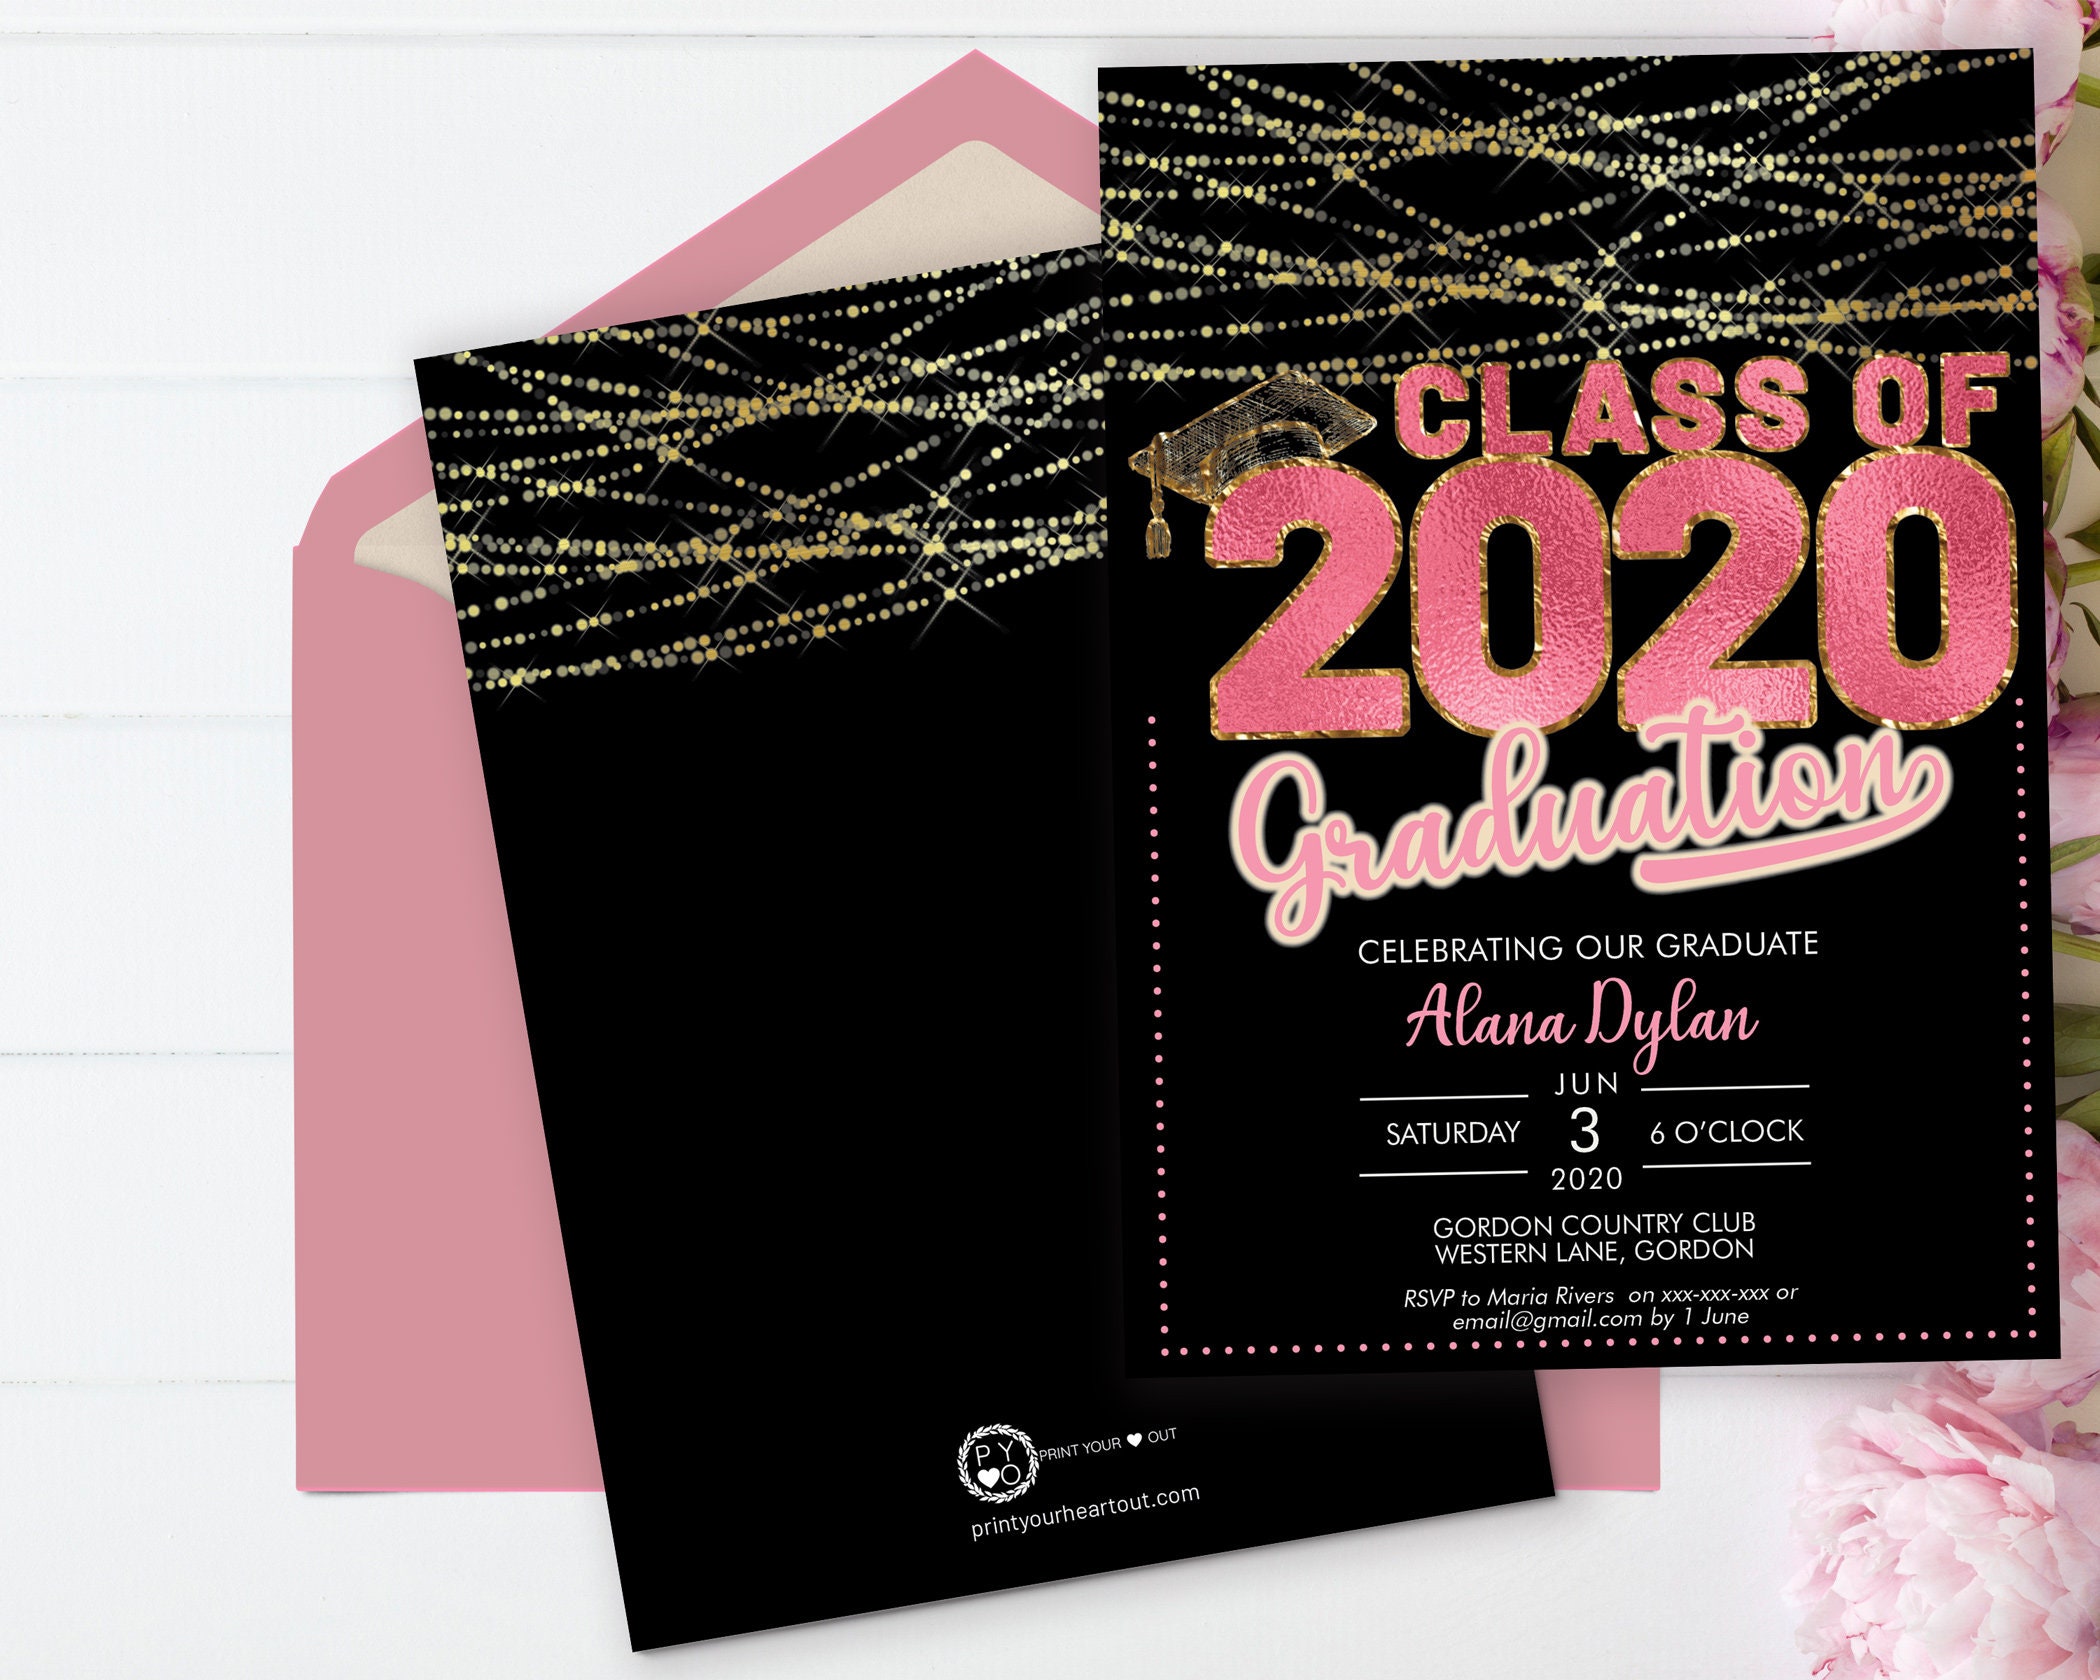 Class of 2020 Pink Graduation Invitation Printable Template, Gold